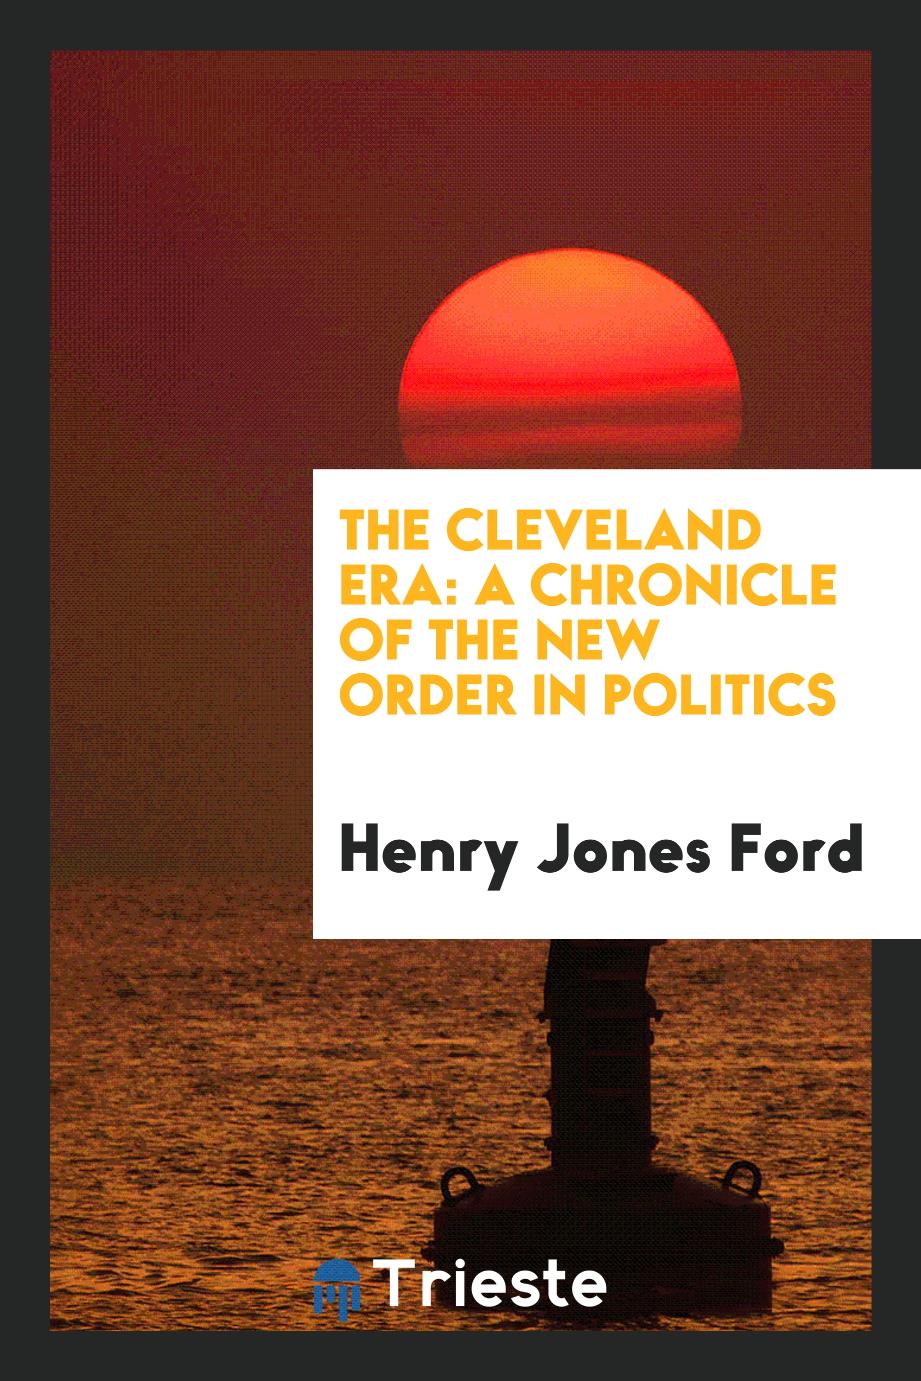 The Cleveland era: a chronicle of the new order in politics